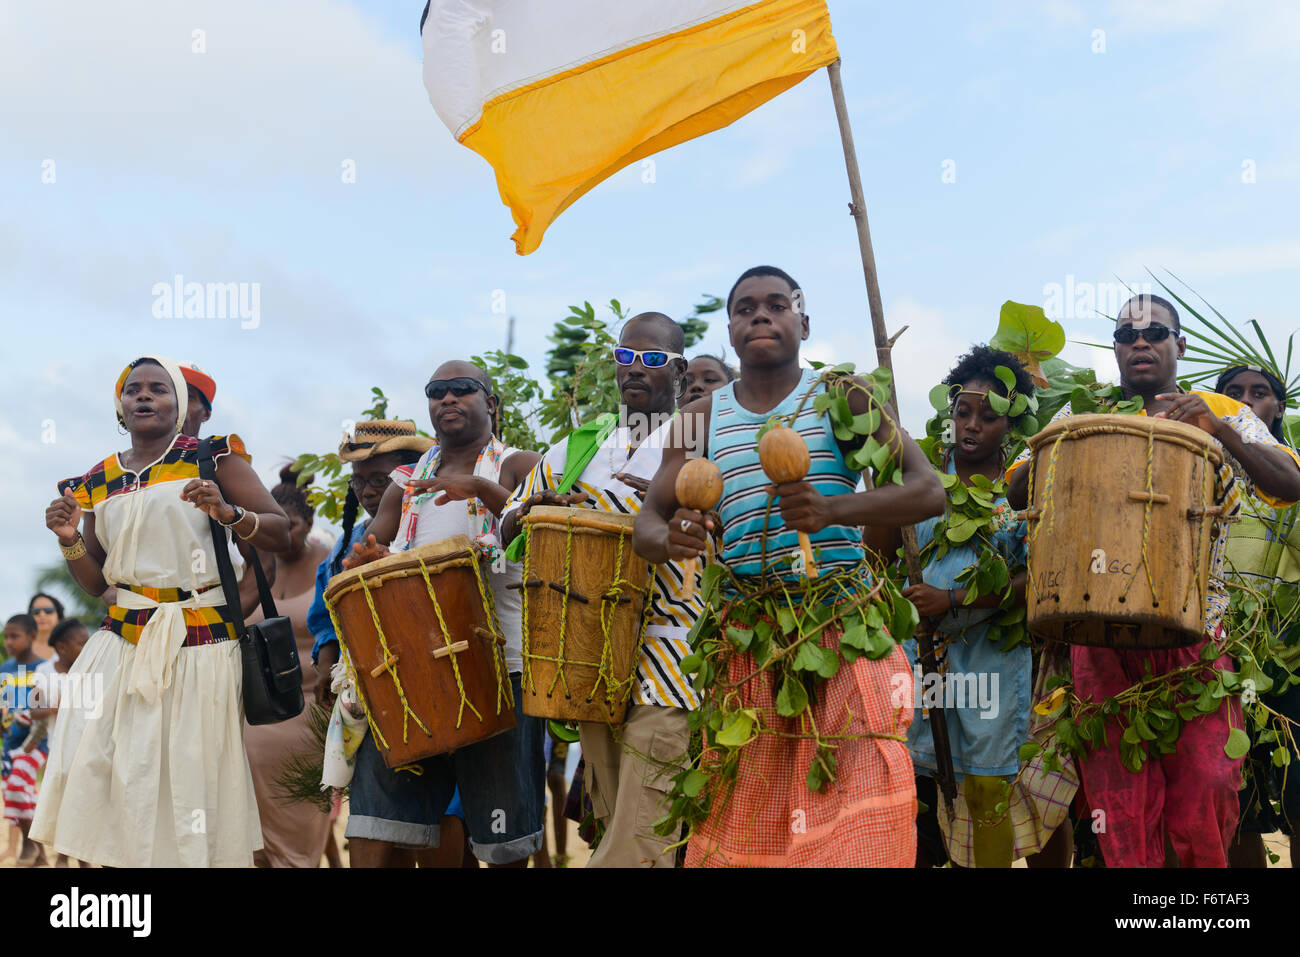 Hopkins Village, Belize, - November 19, 2015: The Garifuna people of Belize celebrate the landing of the first Garifuna people on the shores of Belize from Africa. This is a very important annual celebration for the Garifuna people and a time when they proudly show of their history and cultural heritage. Drummers and dancers lead a parade of celebration under the Belize flag. Credit:  Roi Brooks/Alamy Live News Stock Photo